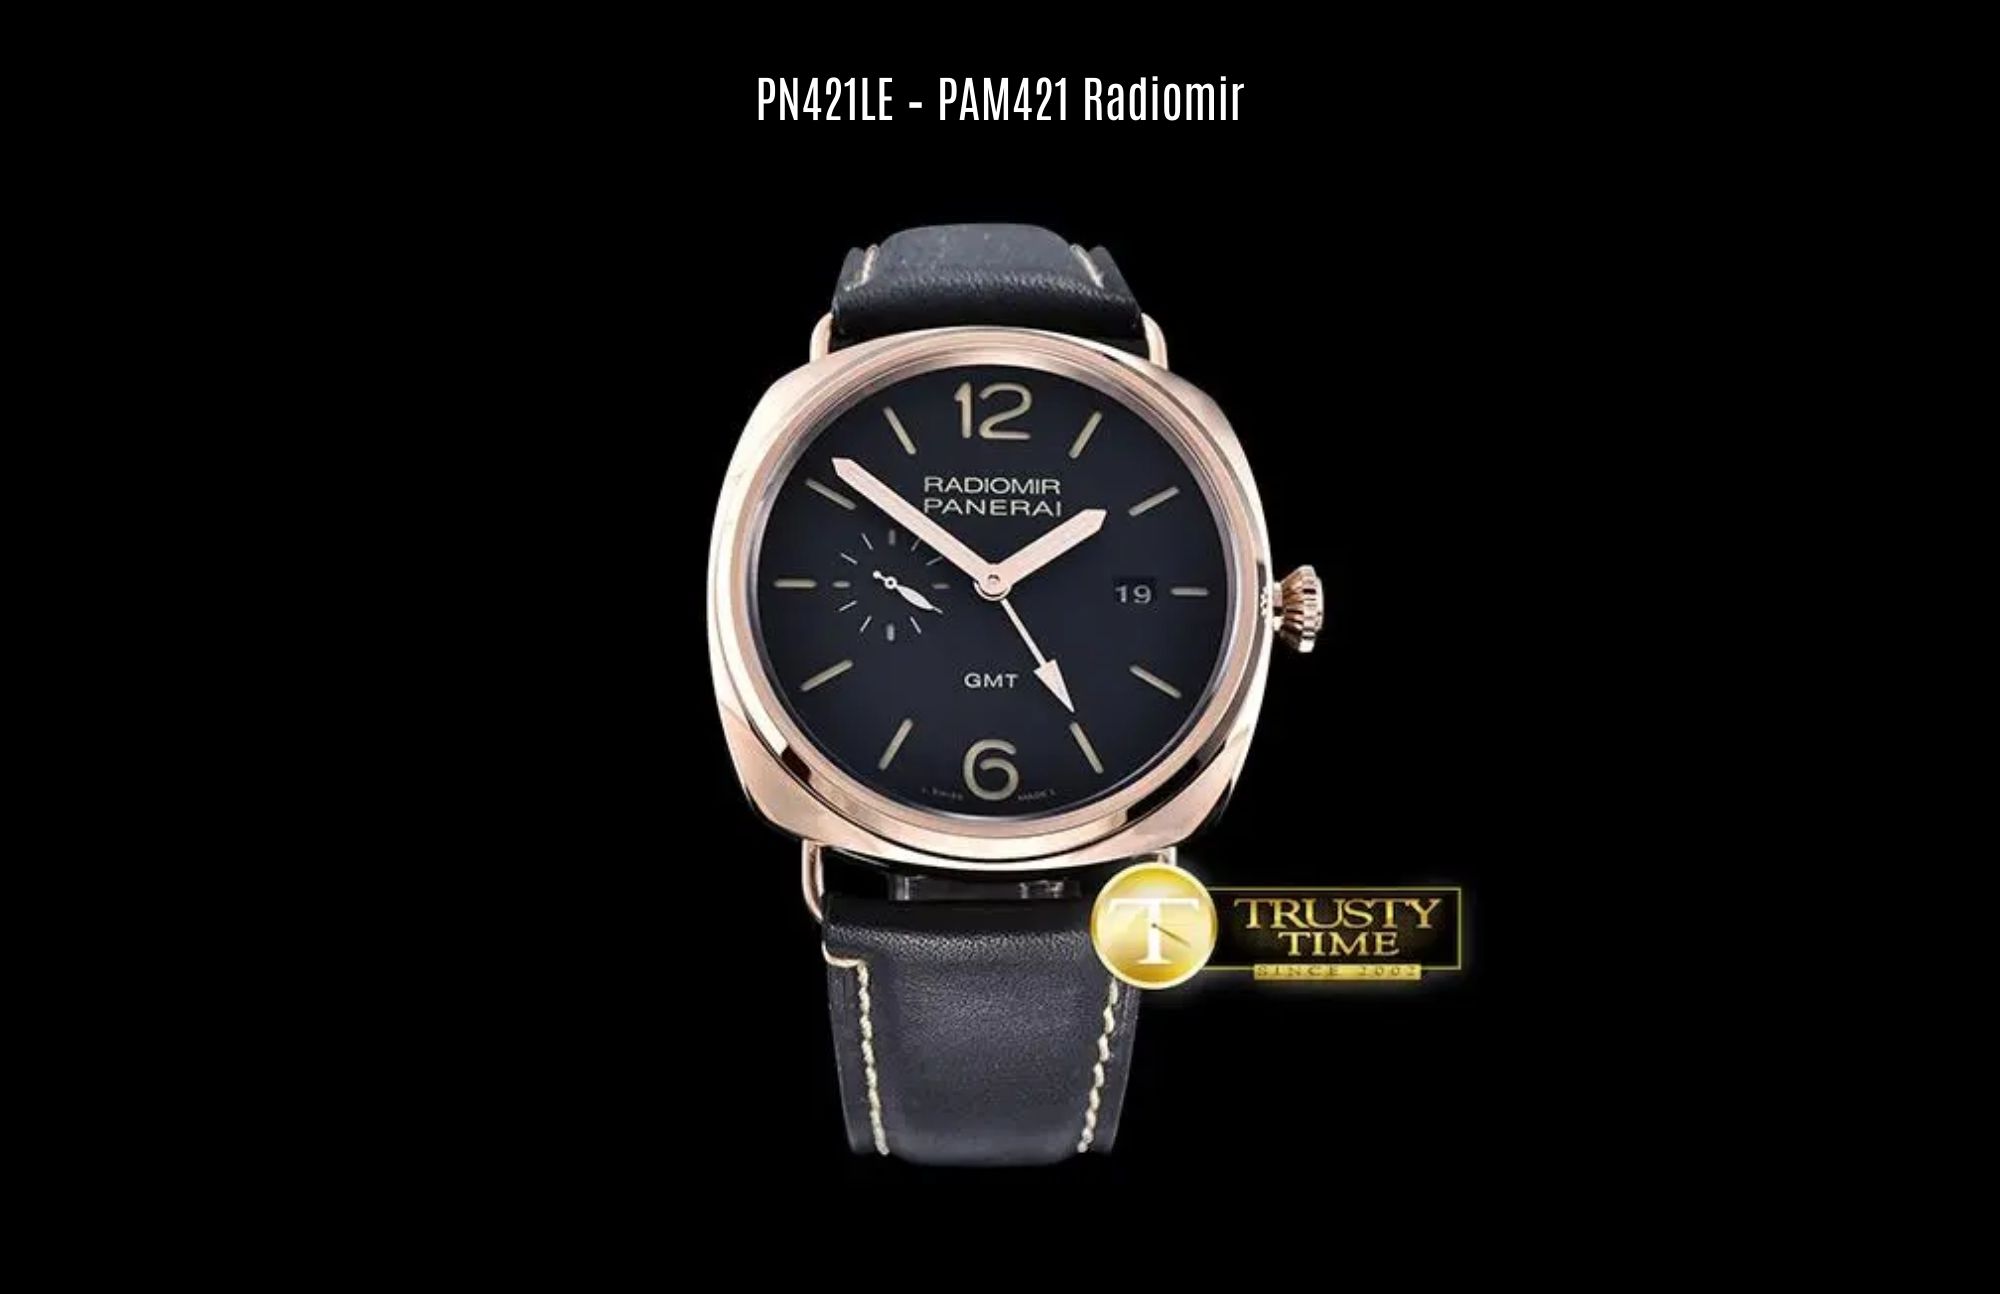 PN421LE – PAM421 Radiomir shows its leather strap with pre V Buckle and black dial